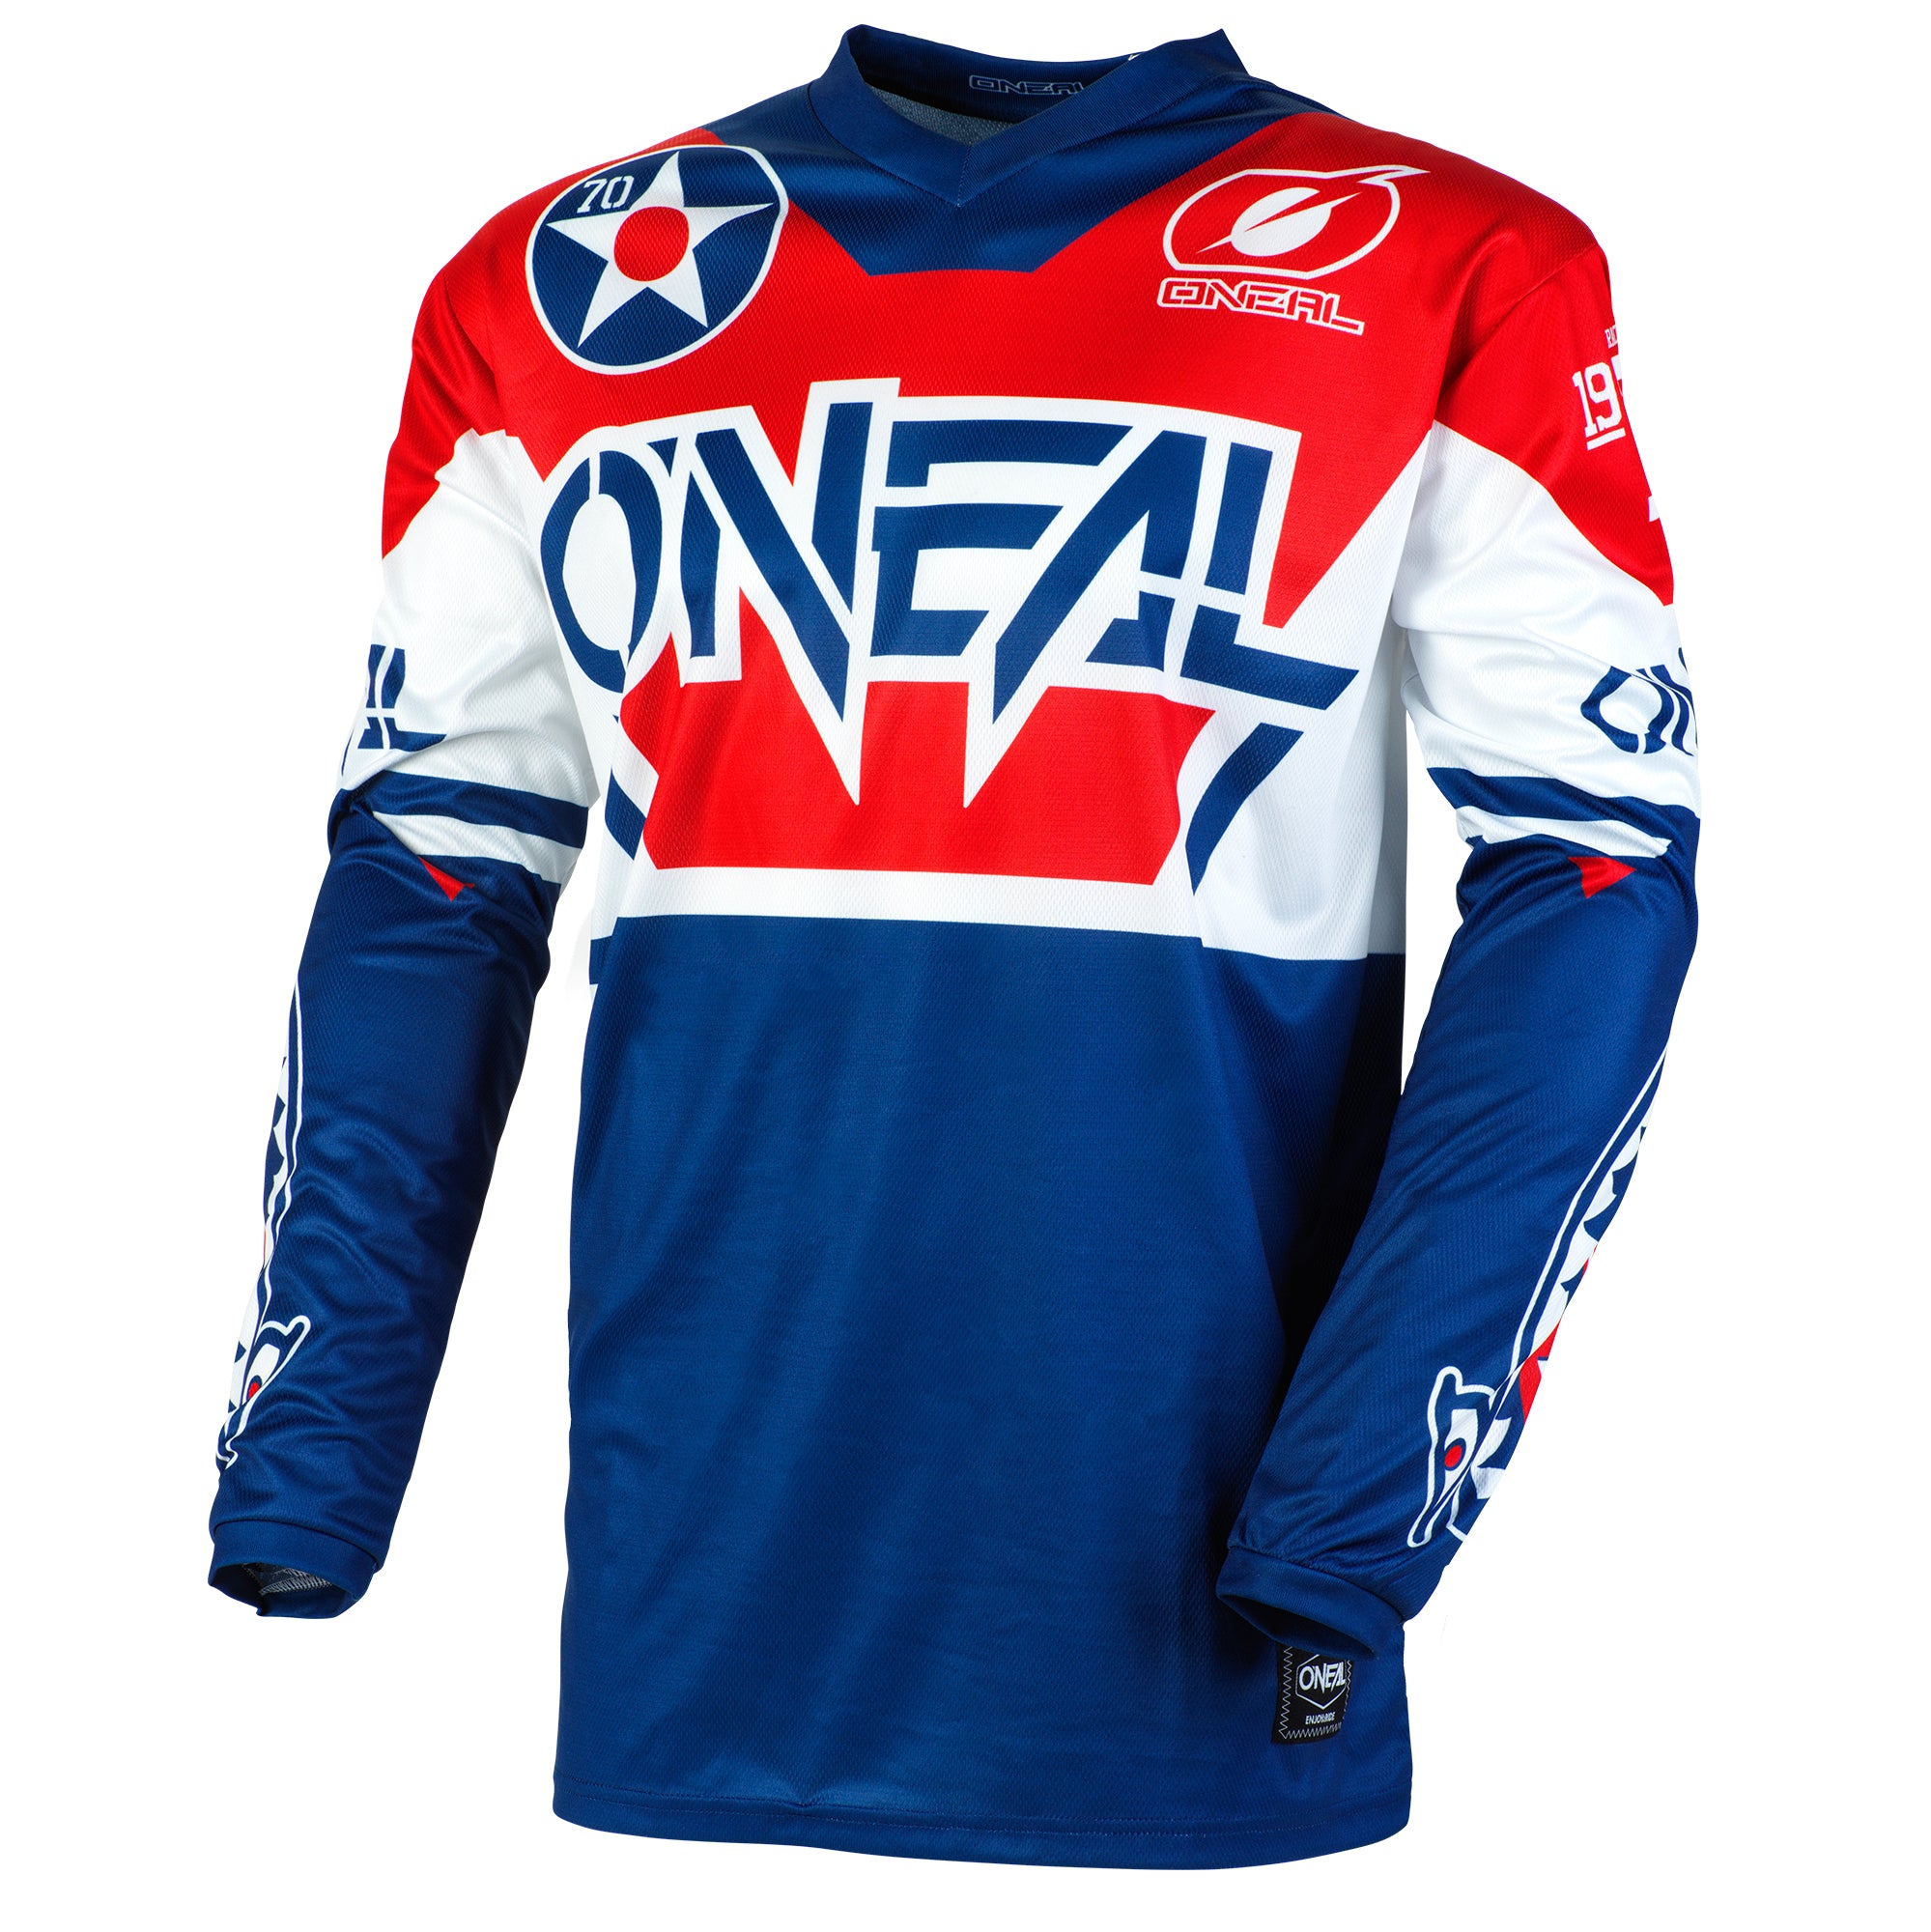 O'NEAL Element Warhawk Jersey Blue/Red – ONEAL USA